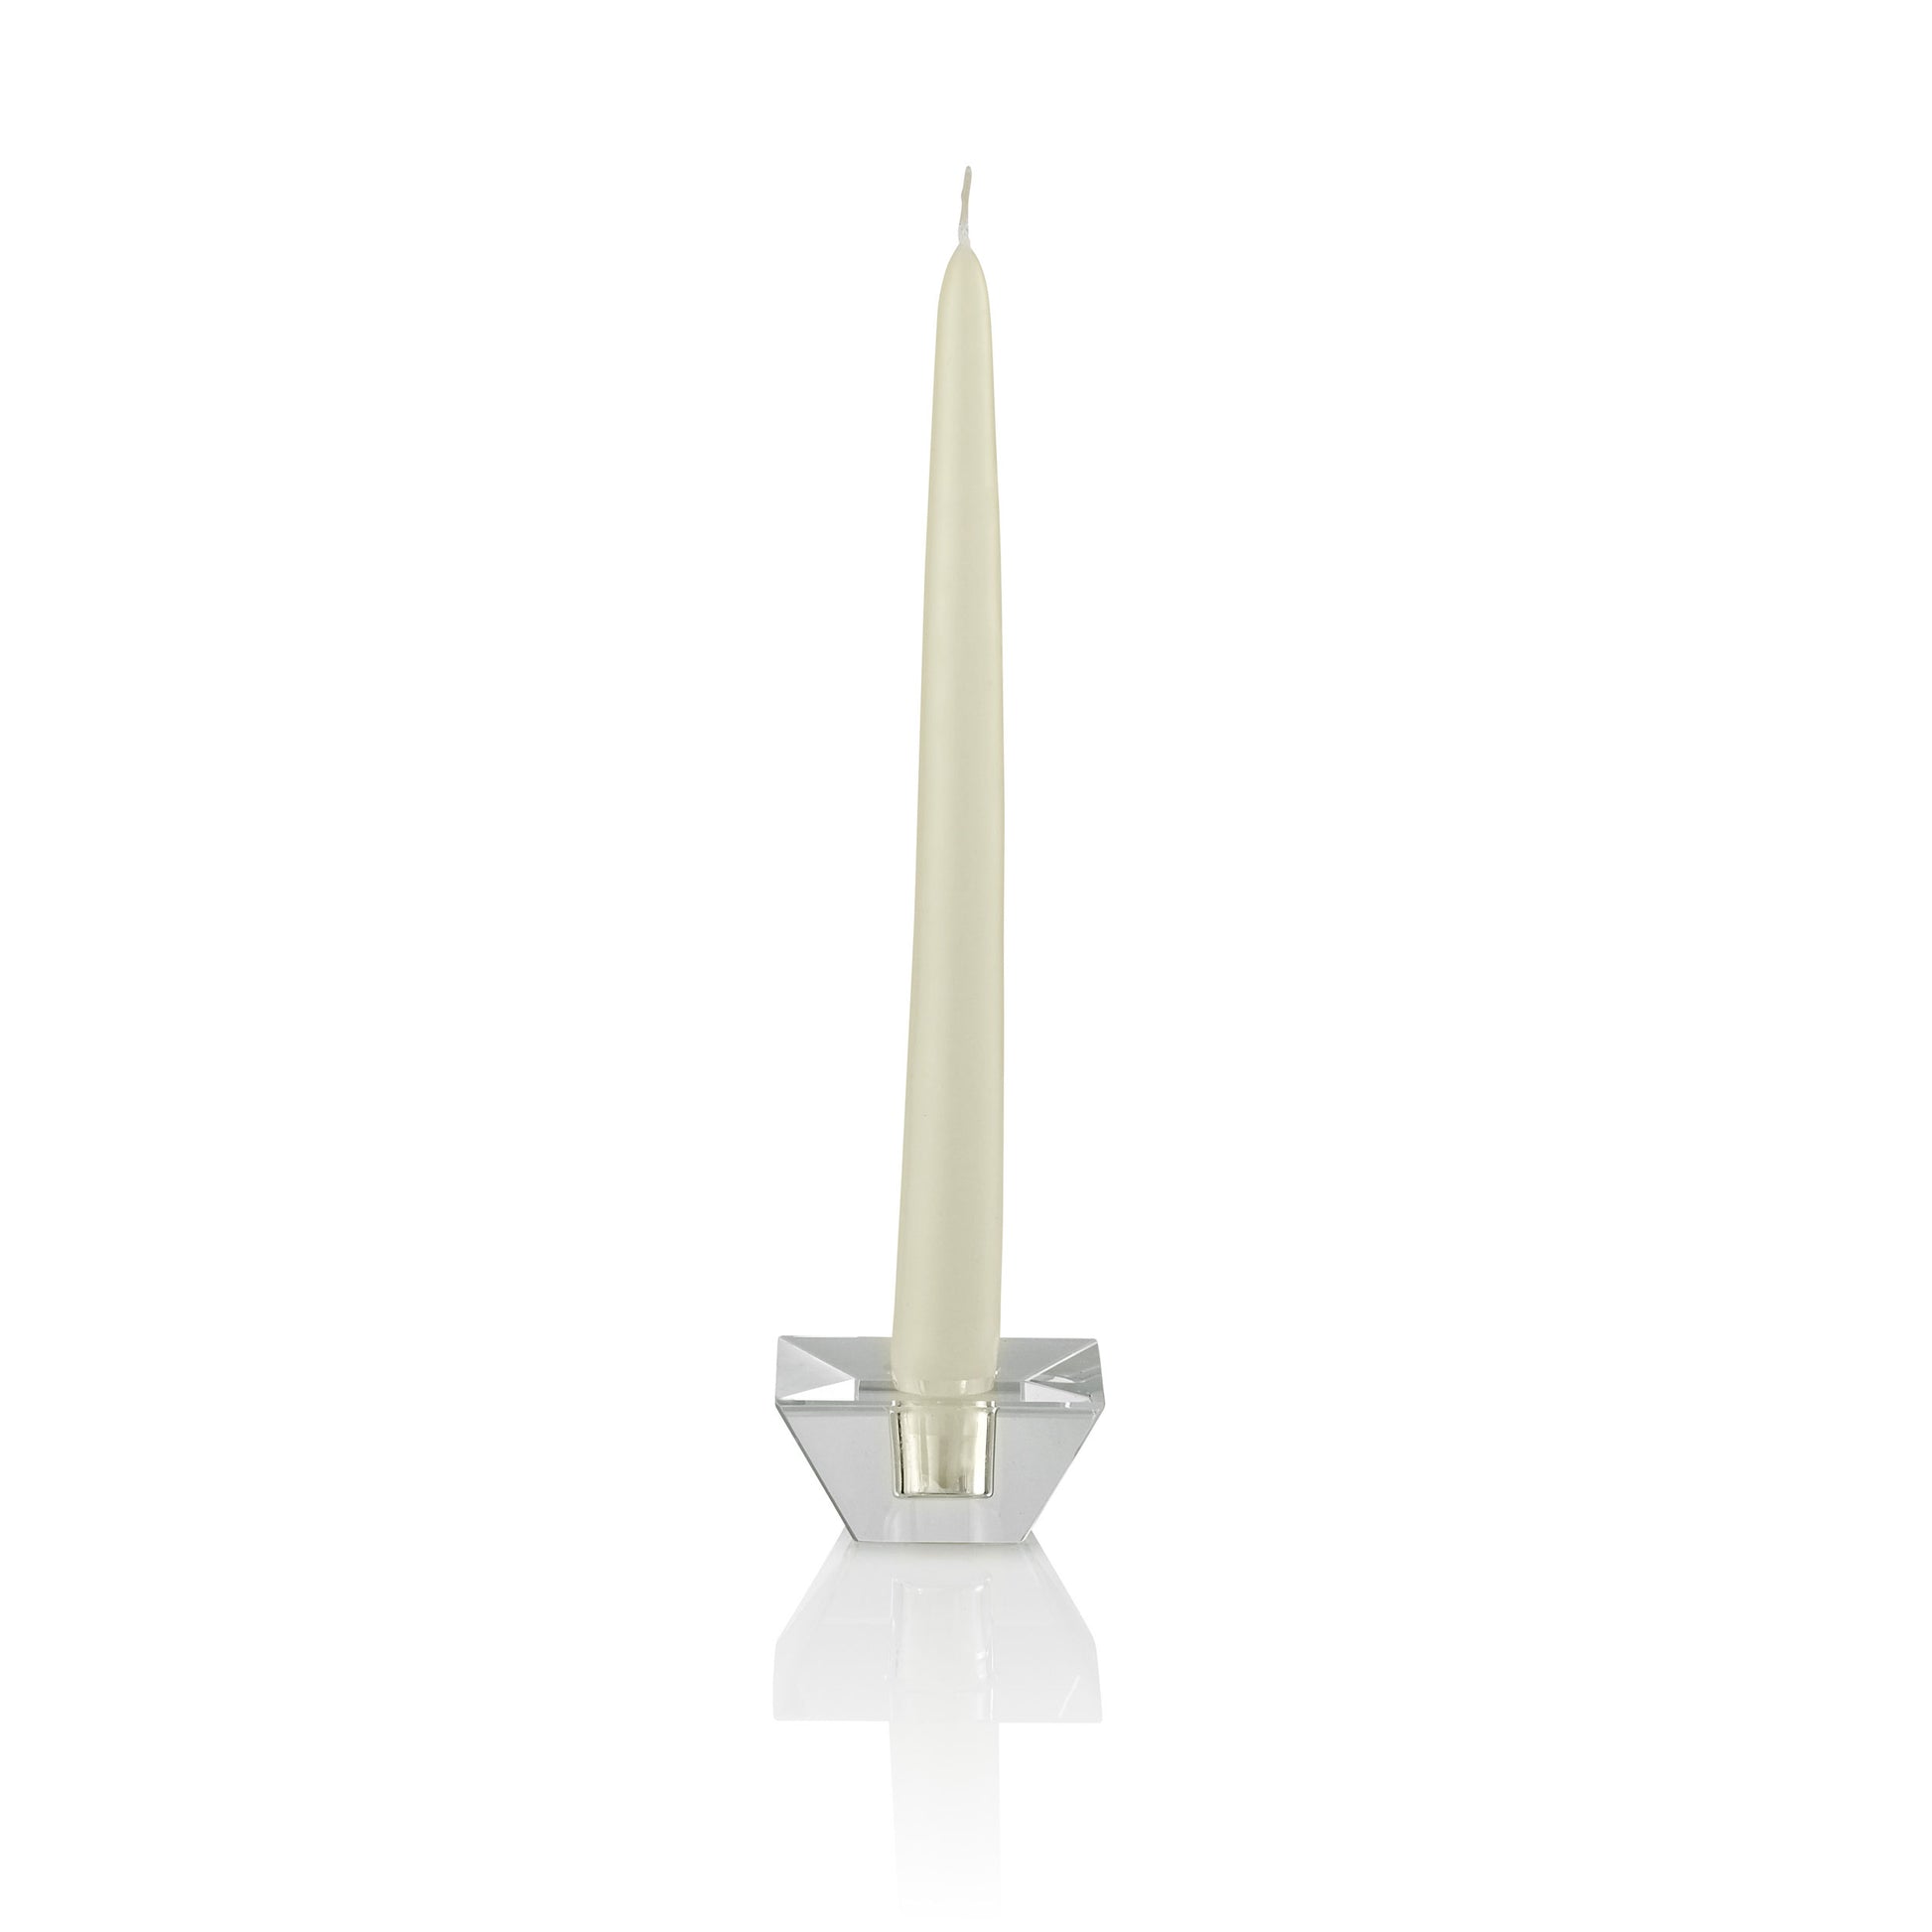 10 Inch Taper Candles, Bulk, Unscented, Set of 144, 1 Gross-taper candles-Ivory-TableTopLighting.com